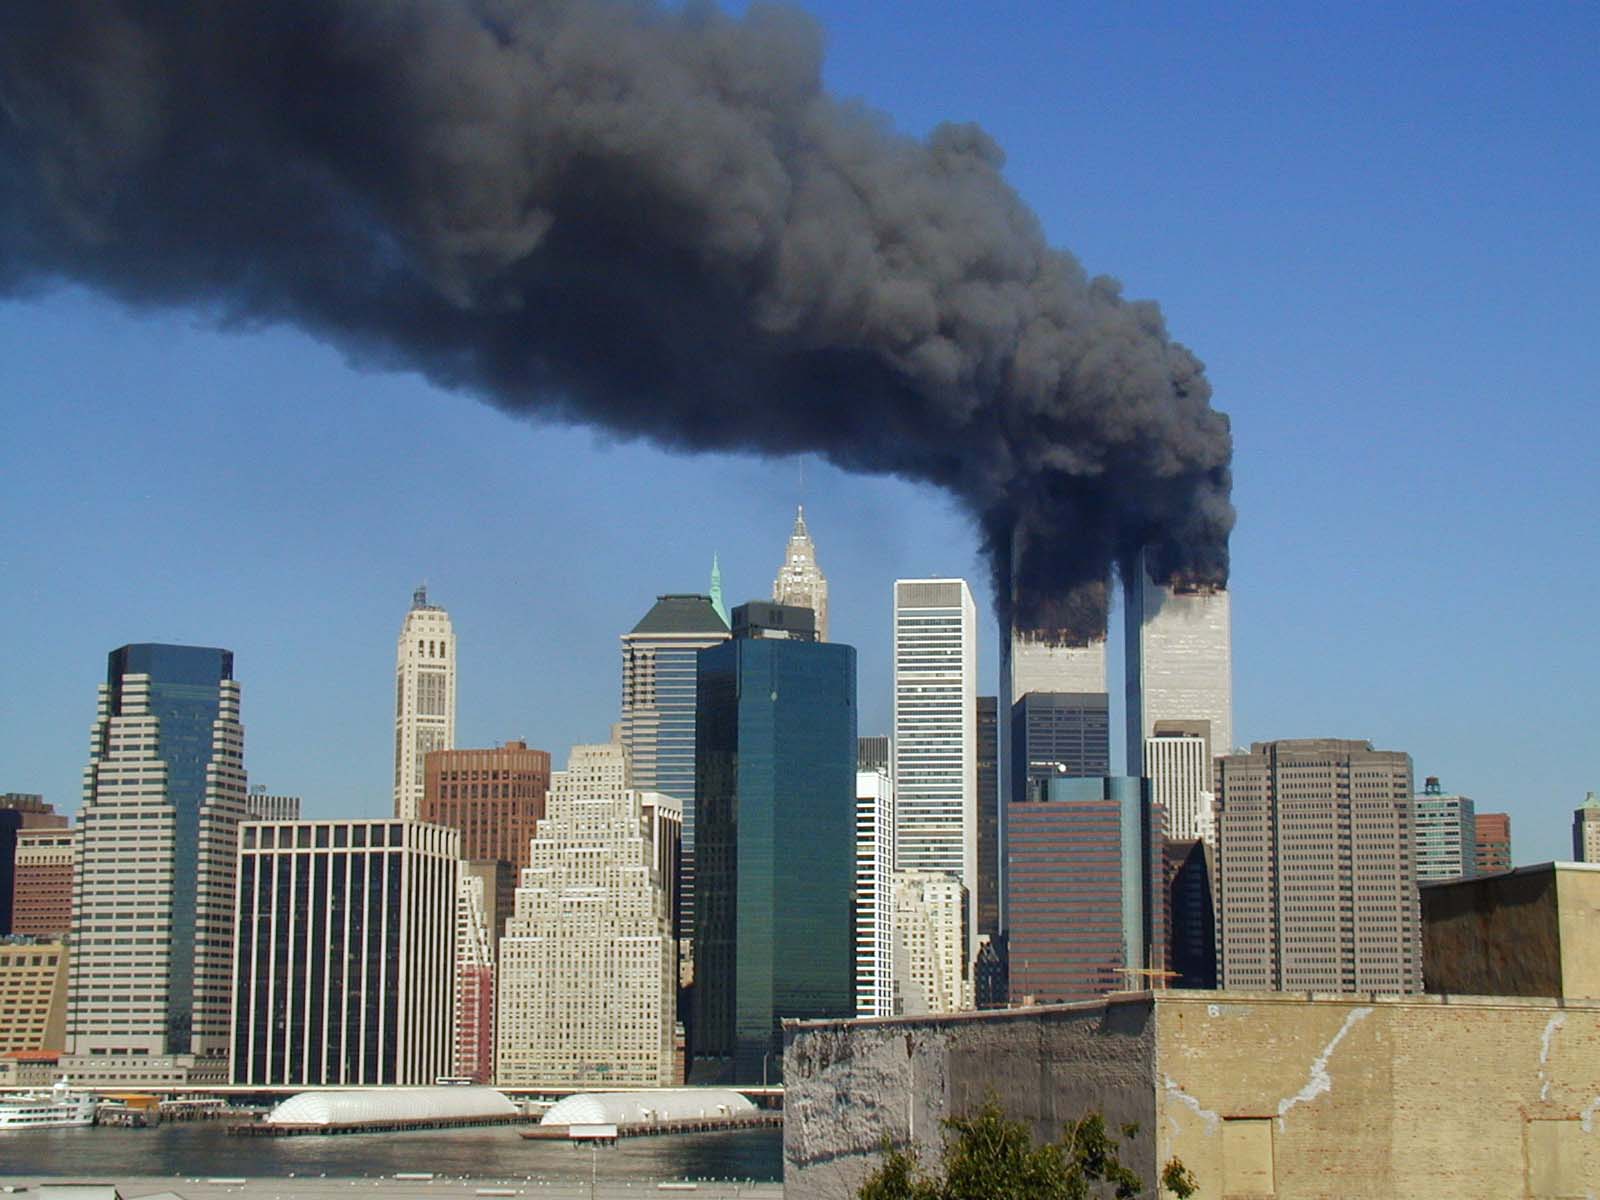 Two New 9/11 Victims Identified With Revolutionary DNA Testing